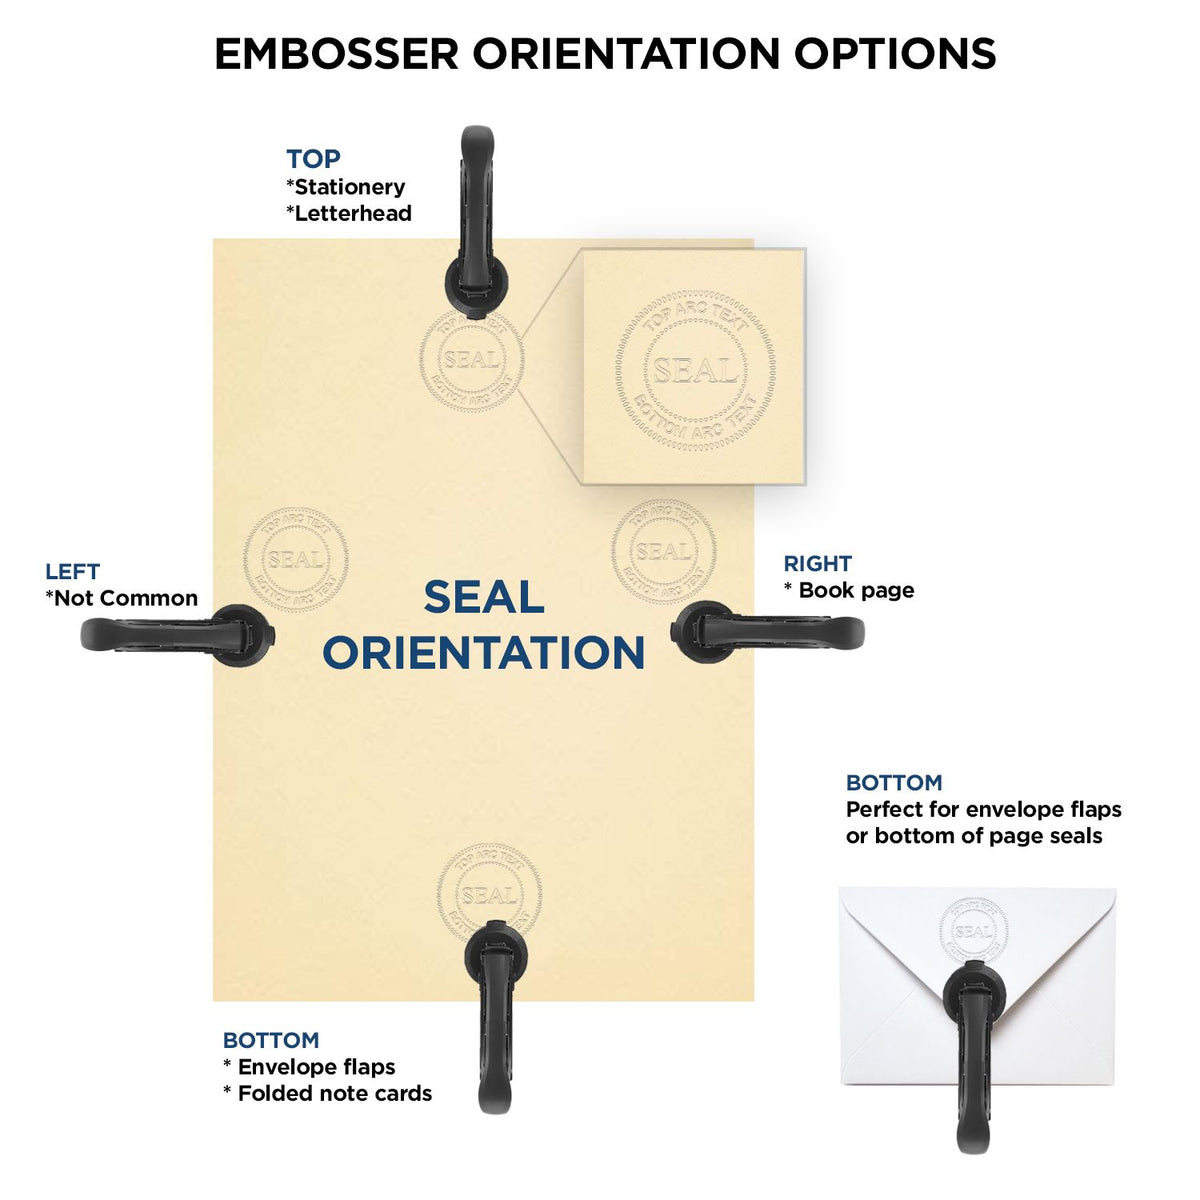 An infographic for the Gift Idaho Landscape Architect Seal showing embosser orientation, this is showing examples of a top, bottom, right and left insert.